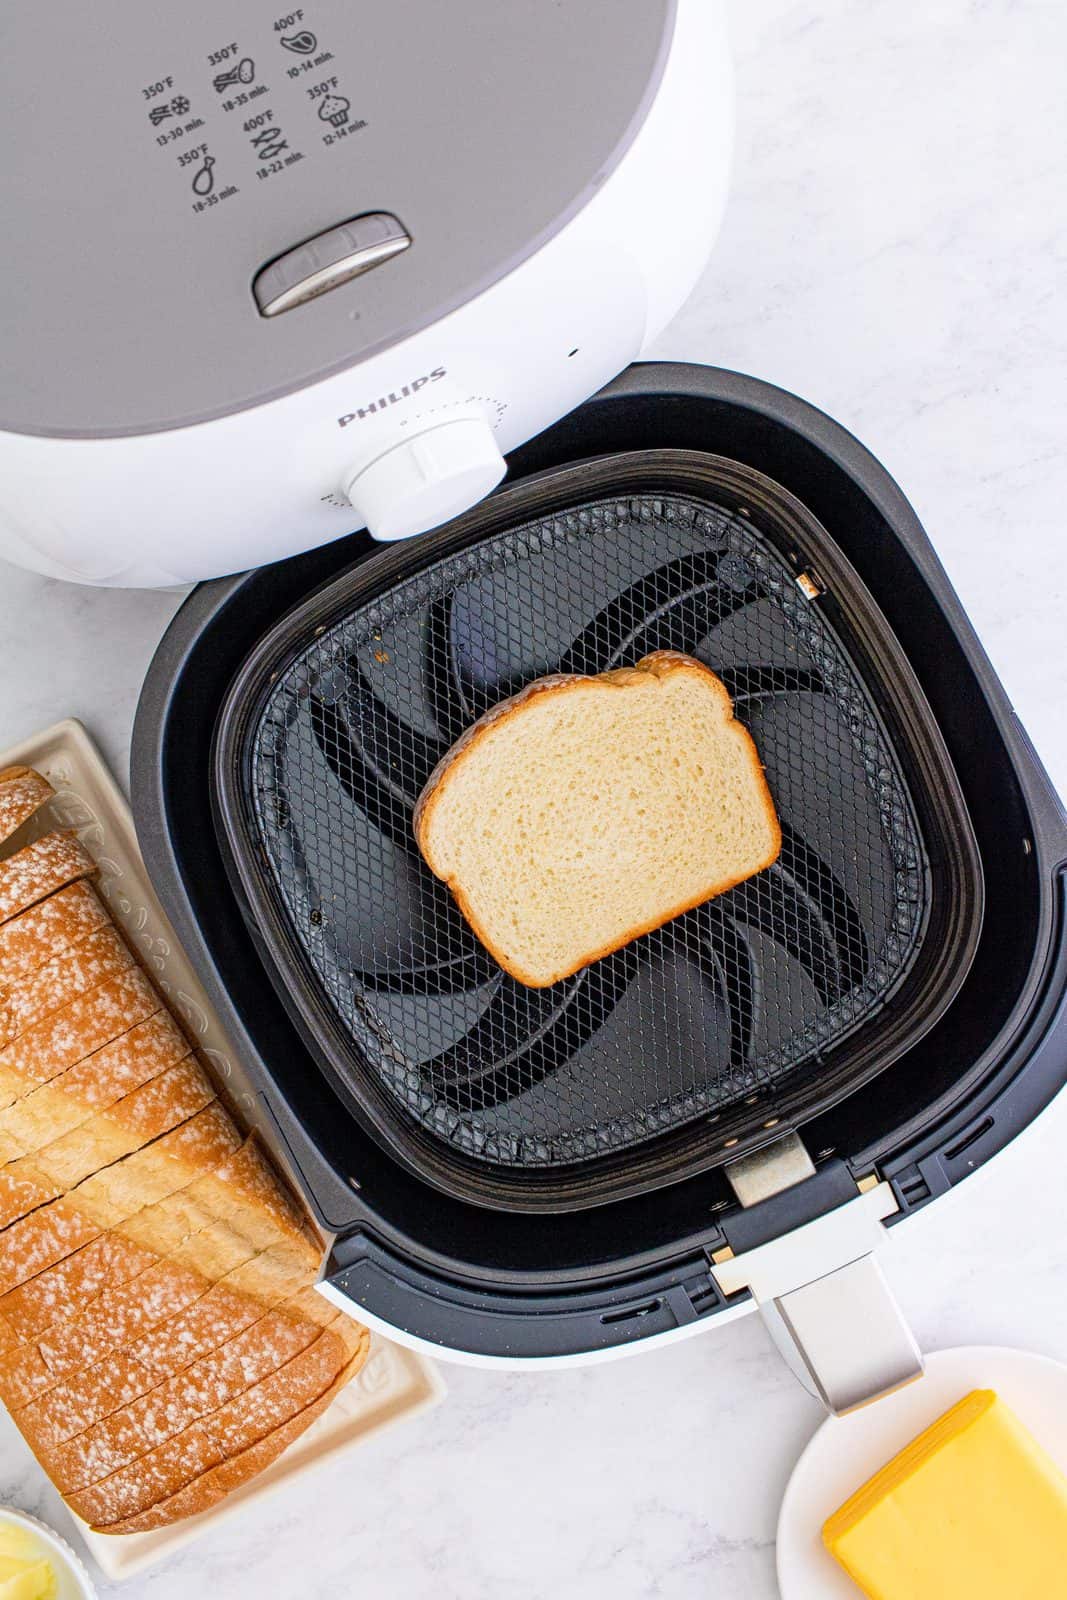 Buttered bread placed buttered side down in air fryer basket.